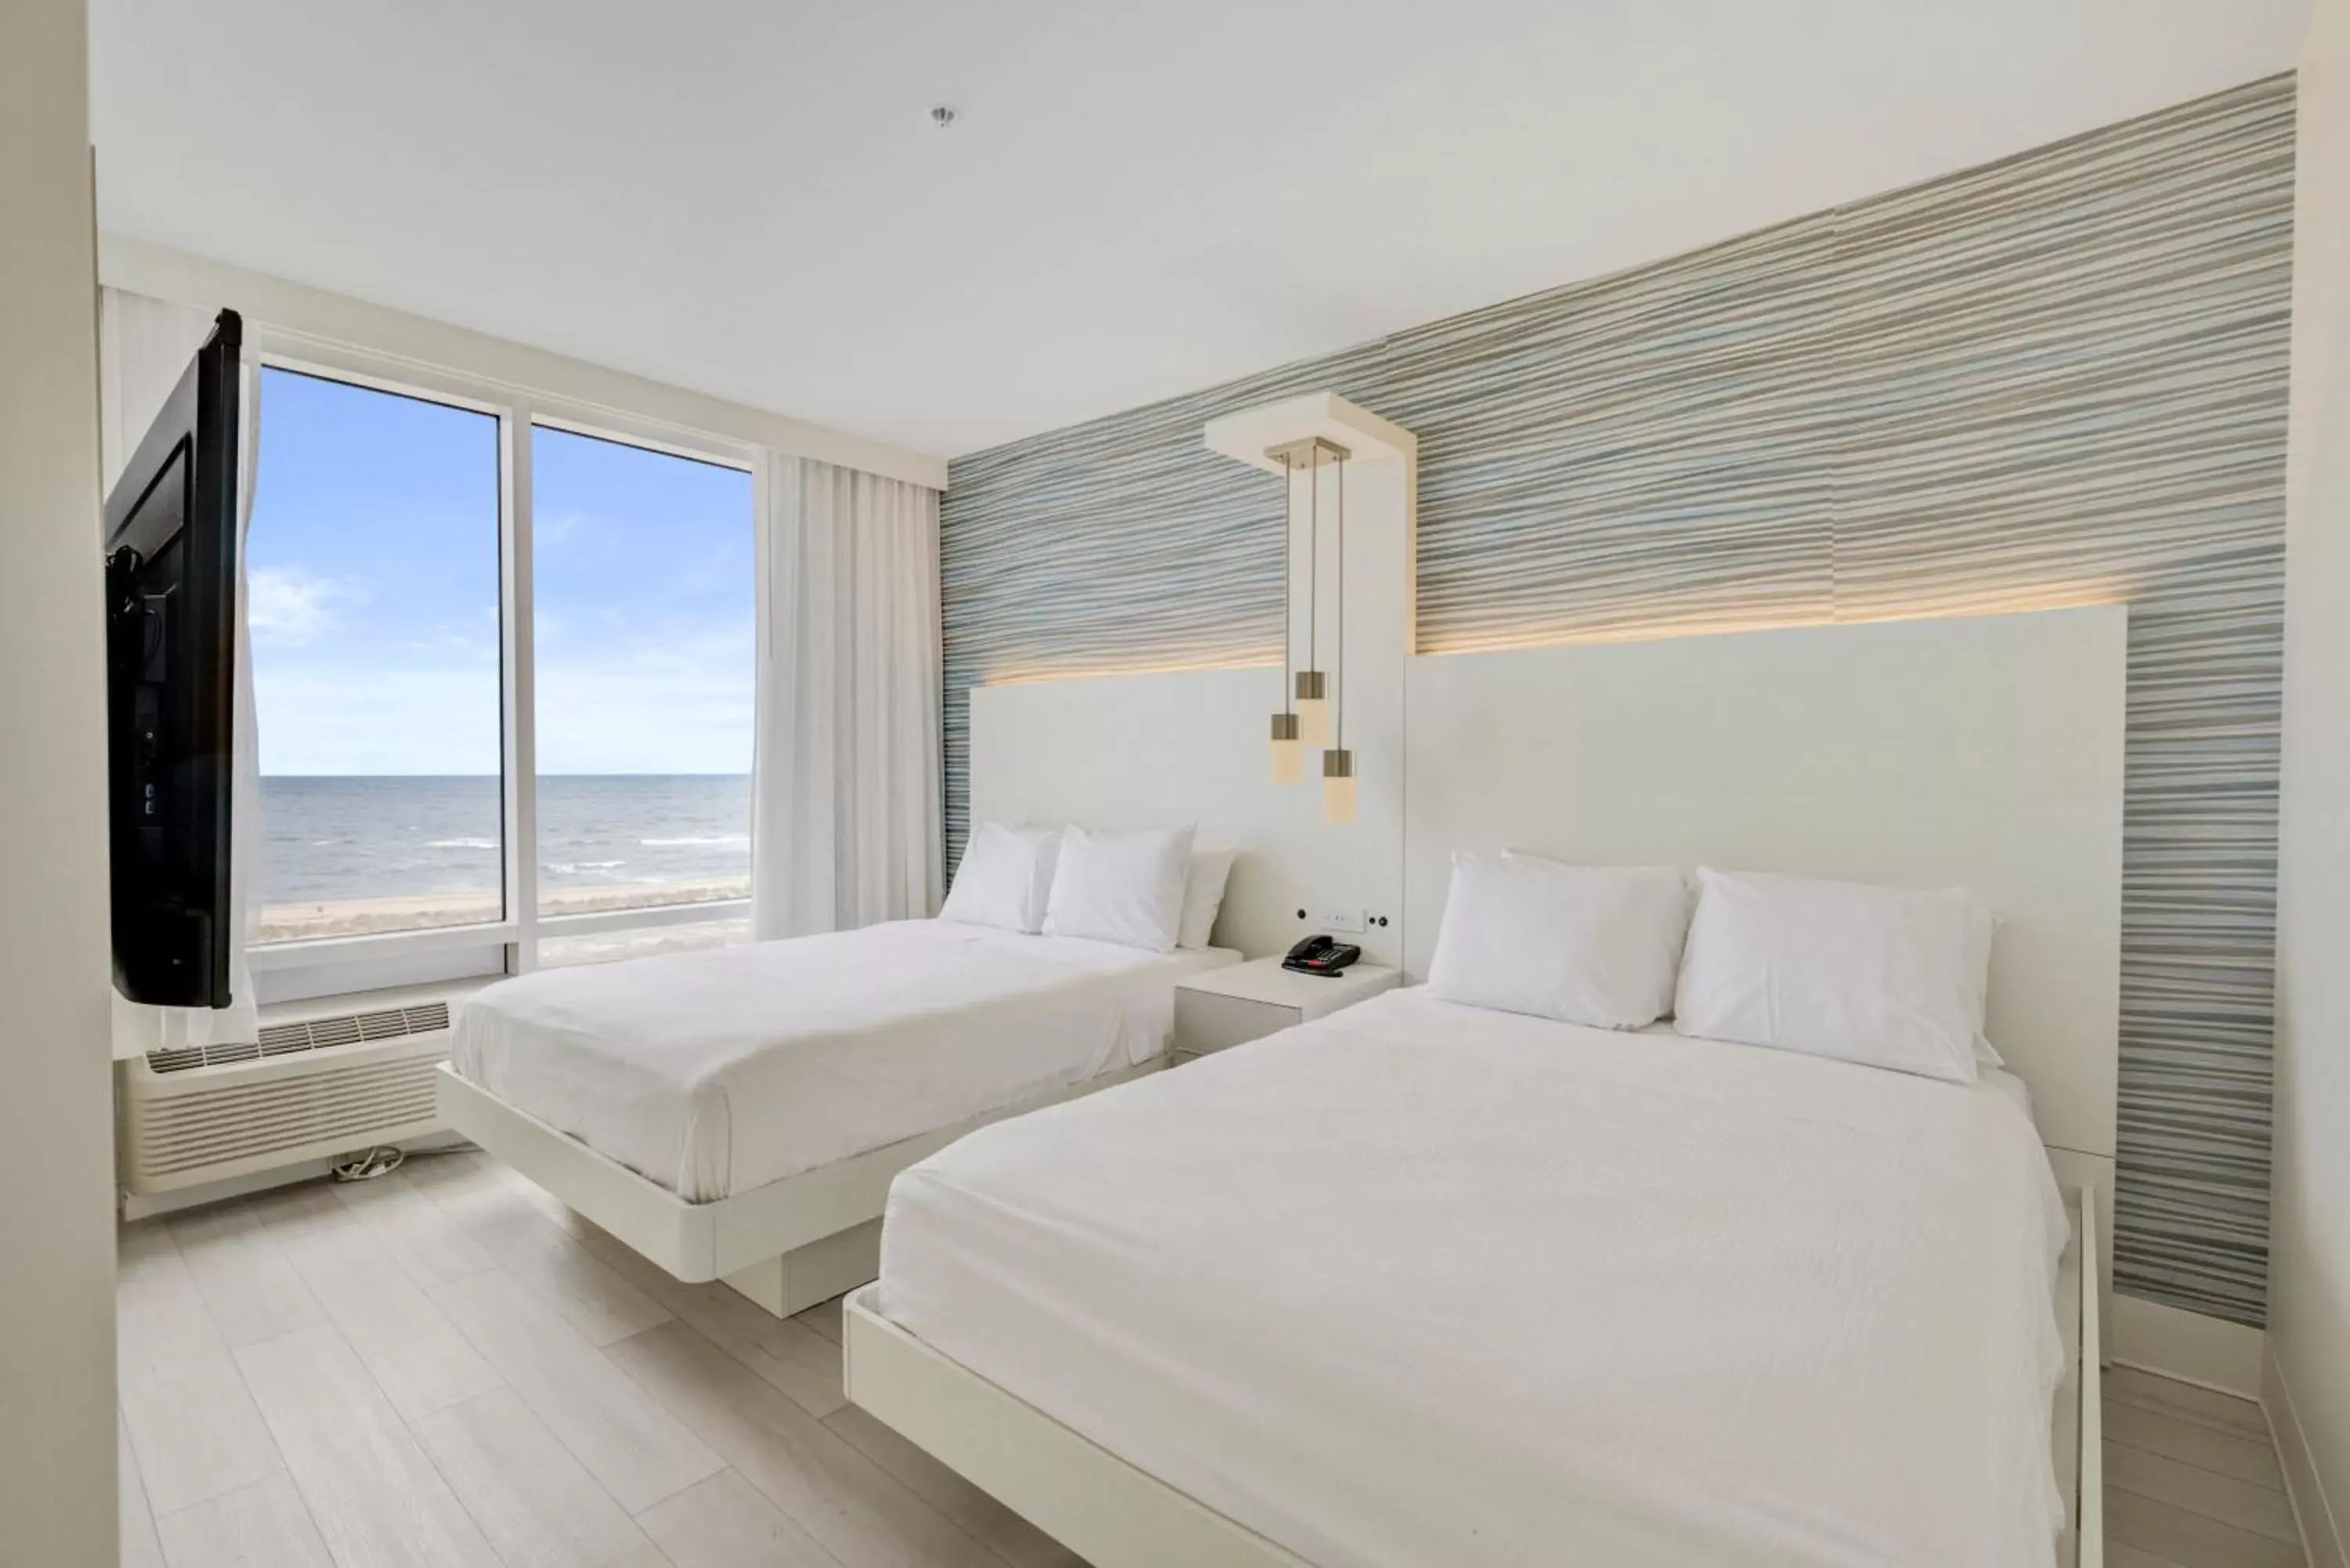 Superior Queen Room with Two Queen Beds in BeachWalk at Sea Bright